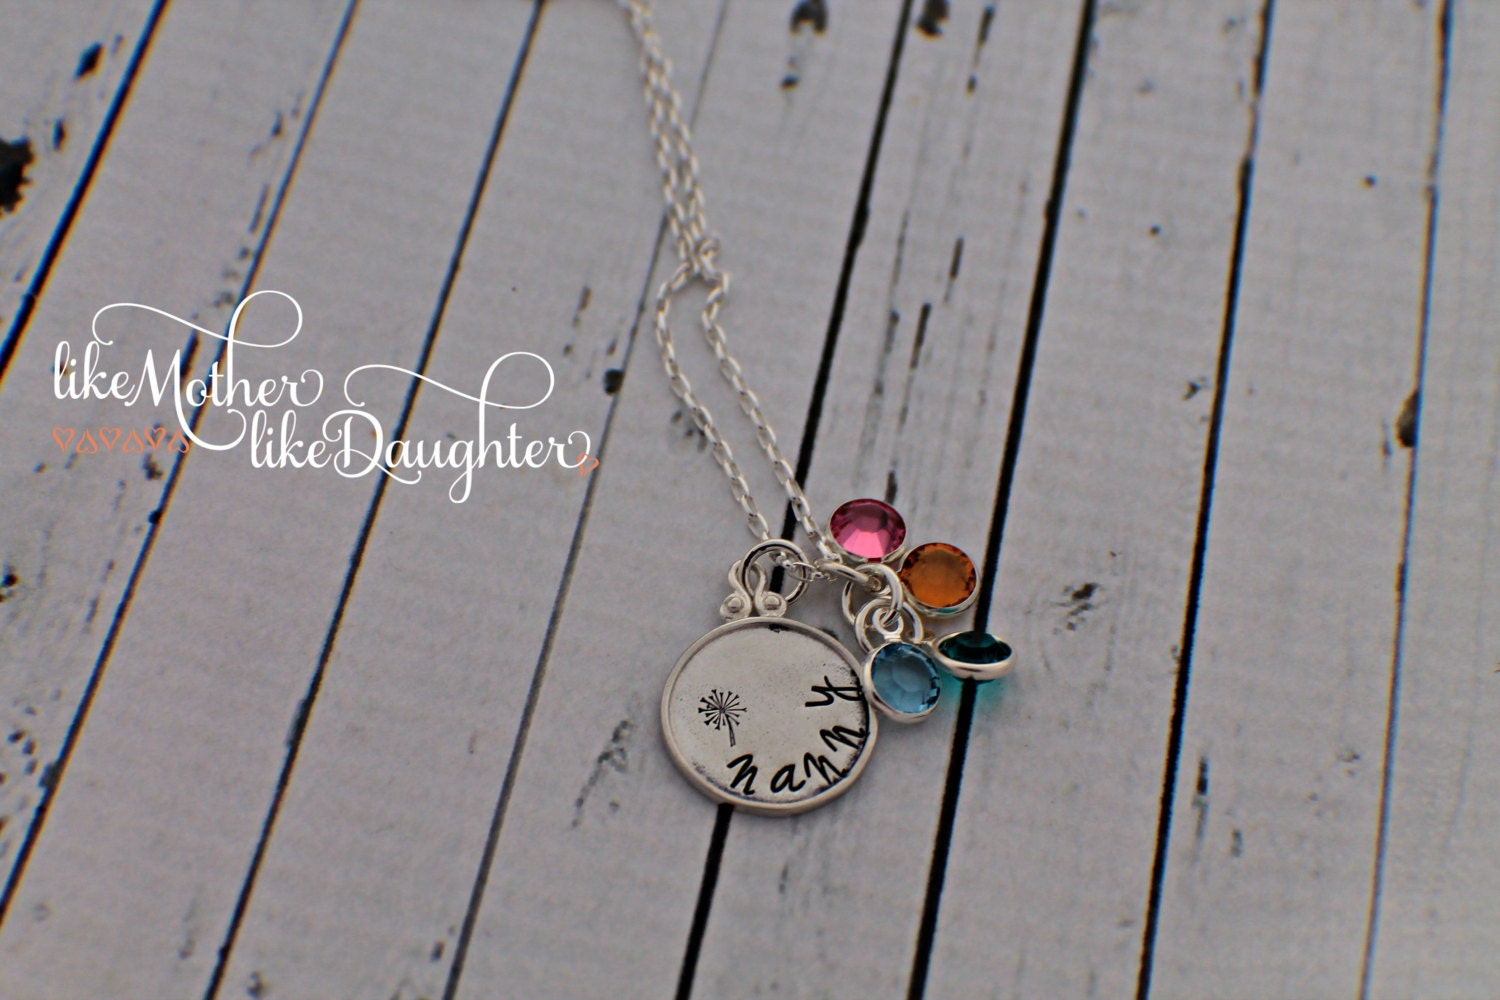 Personalized Grandmother Jewelry - Necklace Hand Stamped Birthstone Jewelry - Hand Stamped Jewelry - Birthstone Necklace - Grandma Necklace